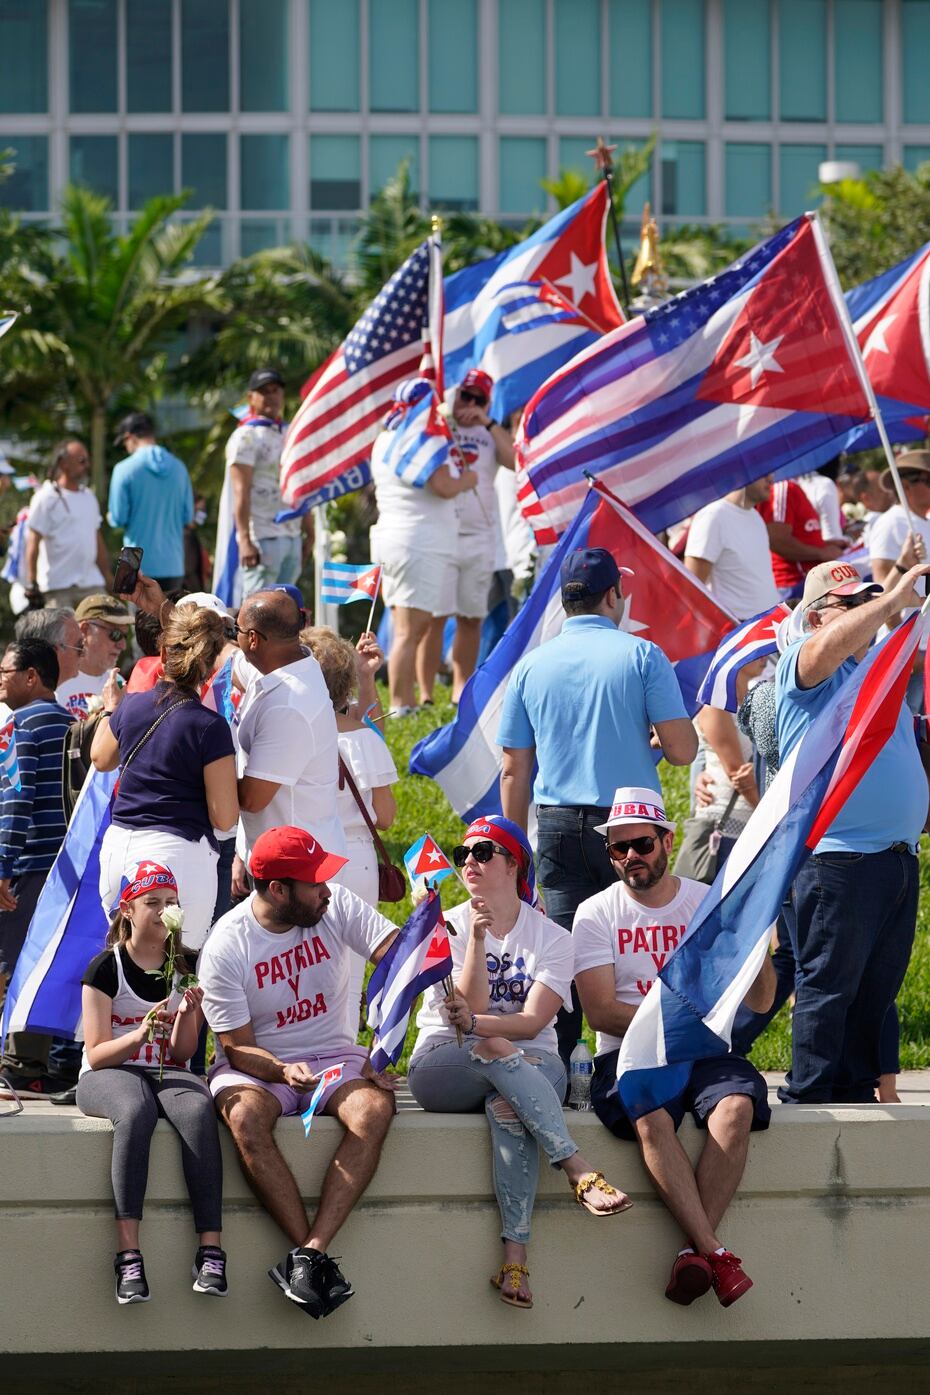 With cries of "Liberty", "Homeland and life" and "Down with the dictatorship"Dressed mostly in white and with Cuban flags and white roses in their hands, the Cubans gathered in a dock near the Freedom Tower, an icon of exile.